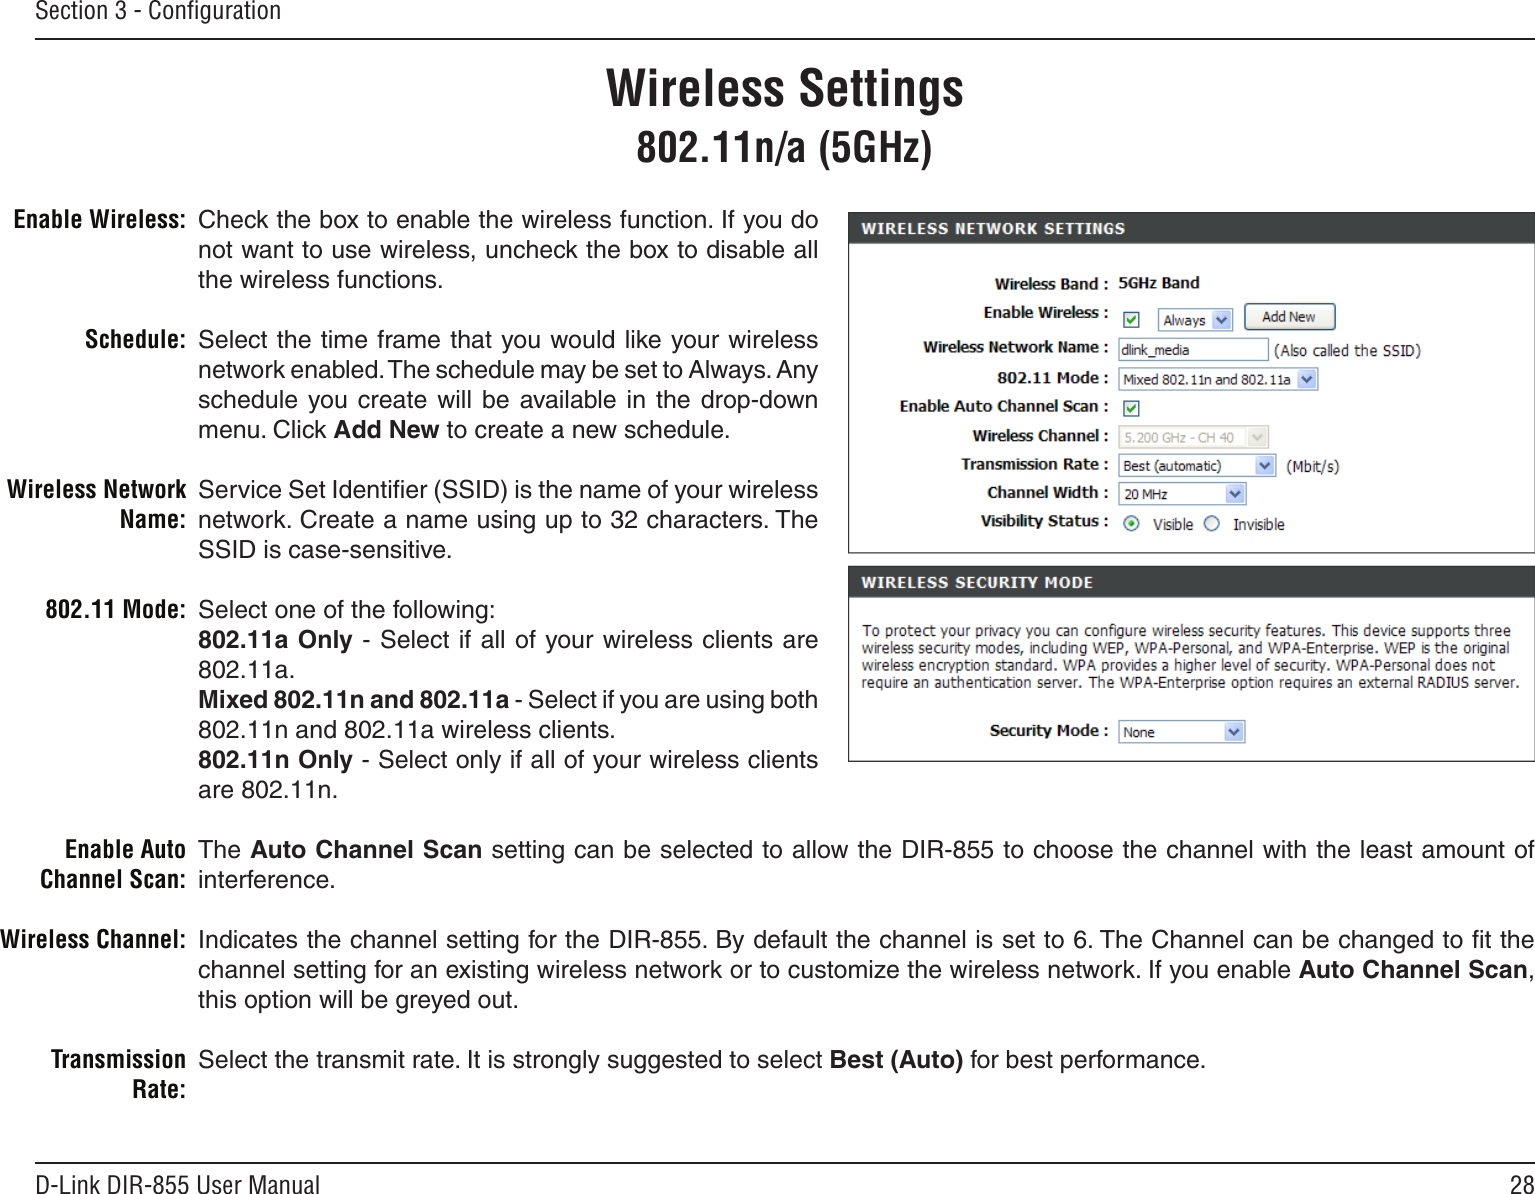 28D-Link DIR-855 User ManualSection 3 - ConﬁgurationWireless Settings802.11n/a (5GHz)Check the box to enable the wireless function. If you do not want to use wireless, uncheck the box to disable all the wireless functions.Select the time frame that you would like your wireless network enabled. The schedule may be set to Always. Any schedule  you create  will  be  available in the  drop-down menu. Click Add New to create a new schedule.Service Set Identiﬁer (SSID) is the name of your wireless network. Create a name using up to 32 characters. The SSID is case-sensitive.Select one of the following:802.11a Only - Select if all of your wireless clients are 802.11a.Mixed 802.11n and 802.11a - Select if you are using both 802.11n and 802.11a wireless clients.802.11n Only - Select only if all of your wireless clients are 802.11n.The Auto Channel Scan setting can be selected to allow the DIR-855 to choose the channel with the least amount of interference.Indicates the channel setting for the DIR-855. By default the channel is set to 6. The Channel can be changed to ﬁt the channel setting for an existing wireless network or to customize the wireless network. If you enable Auto Channel Scan, this option will be greyed out.Select the transmit rate. It is strongly suggested to select Best (Auto) for best performance.Enable Wireless:Schedule:Wireless Network Name:802.11 Mode:Enable Auto Channel Scan:Wireless Channel:Transmission Rate: